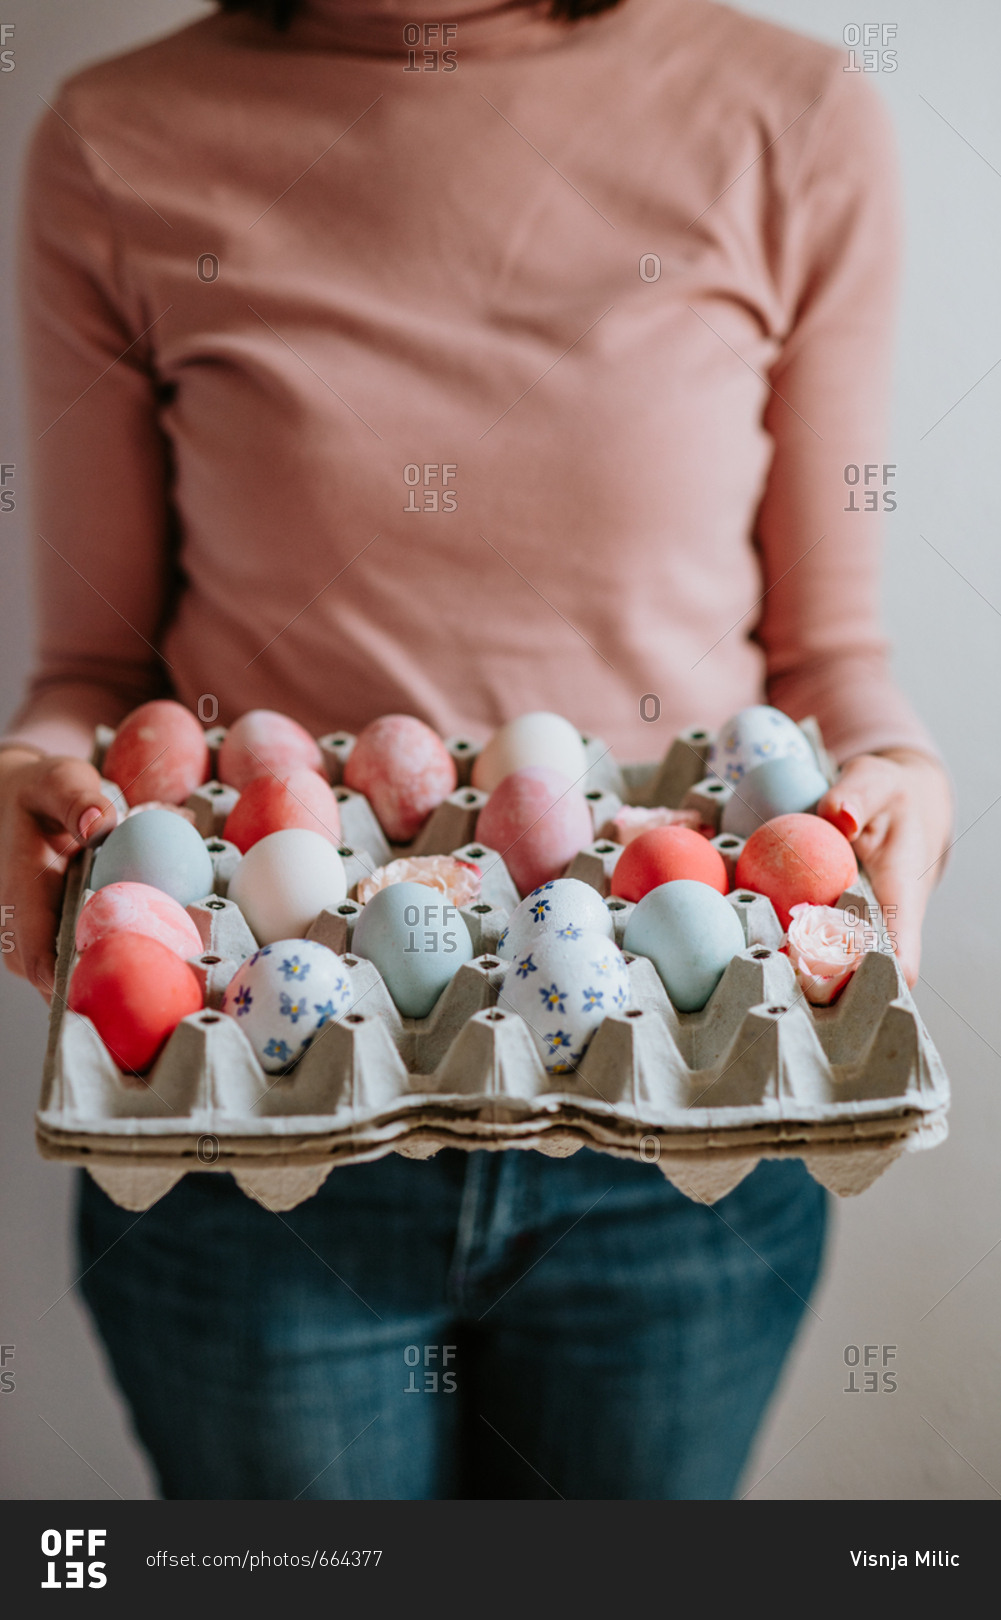 Woman wearing pastel colors holding carton of pastel Easter eggs